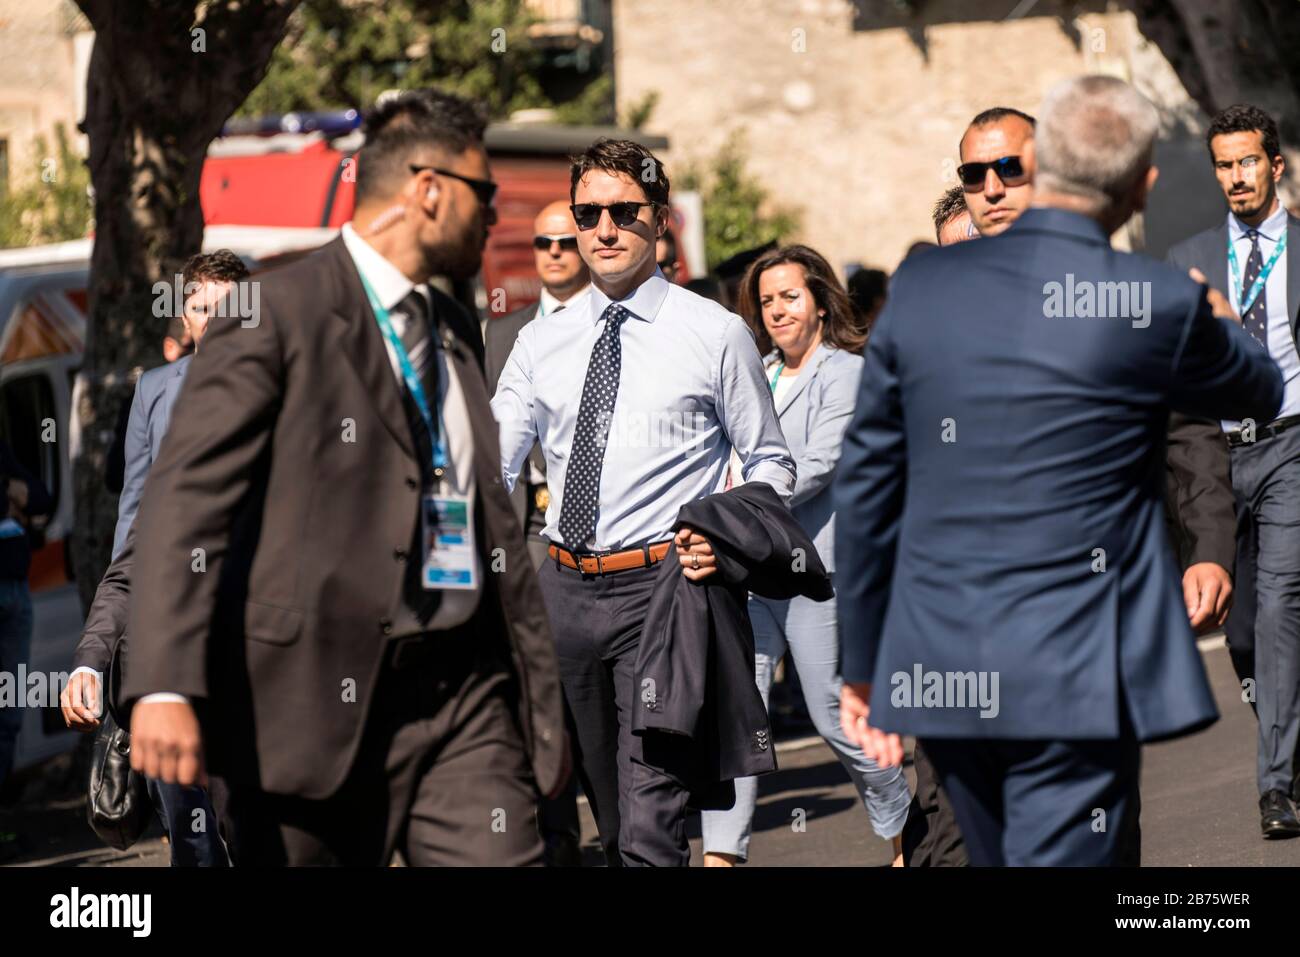 Italy, Taormina, 27.05.2017. G7 summit in the city of Taormina, on the eastern coast of Sicily on 27.05.2017. Arrival of the outreach partners at the Hotel San Domenico Palace in Taormina. Justin Trudeau, Prime Minister of Canada. [automated translation] Stock Photo